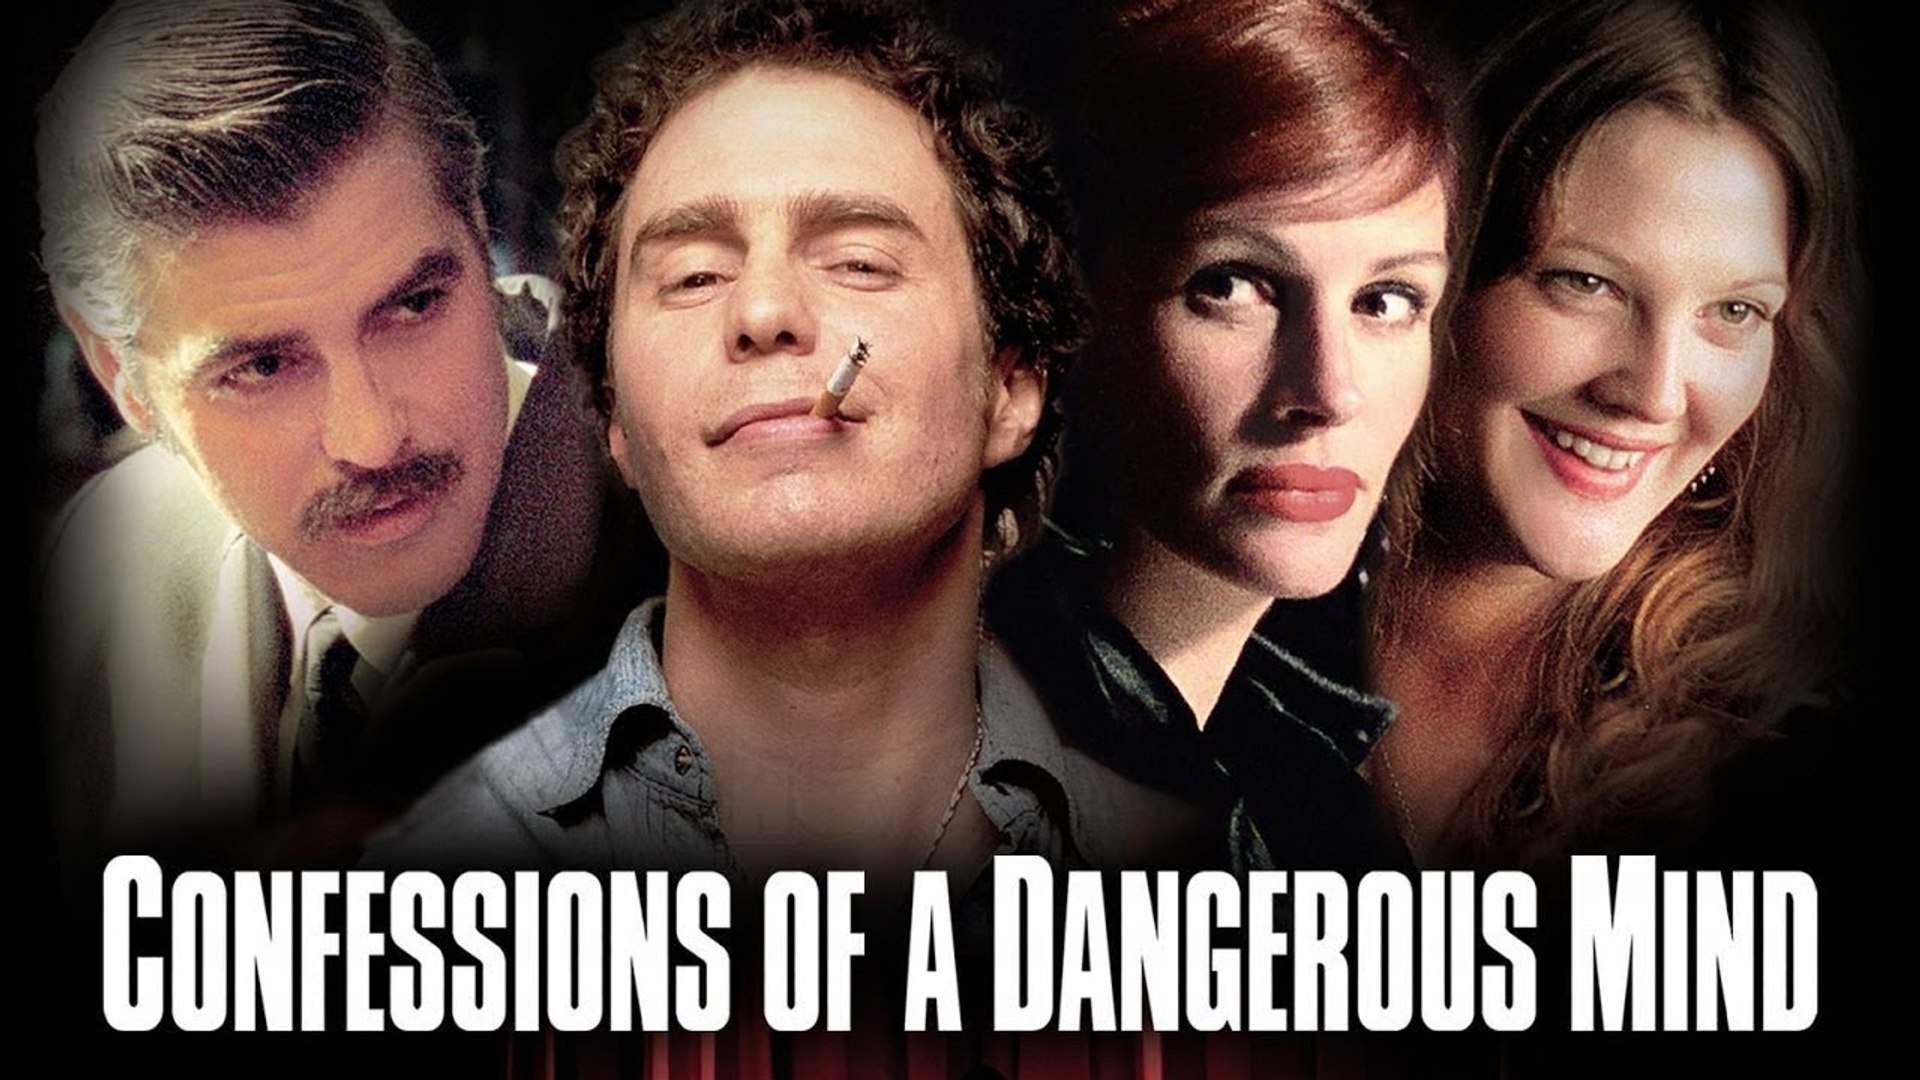 34-facts-about-the-movie-confessions-of-a-dangerous-mind